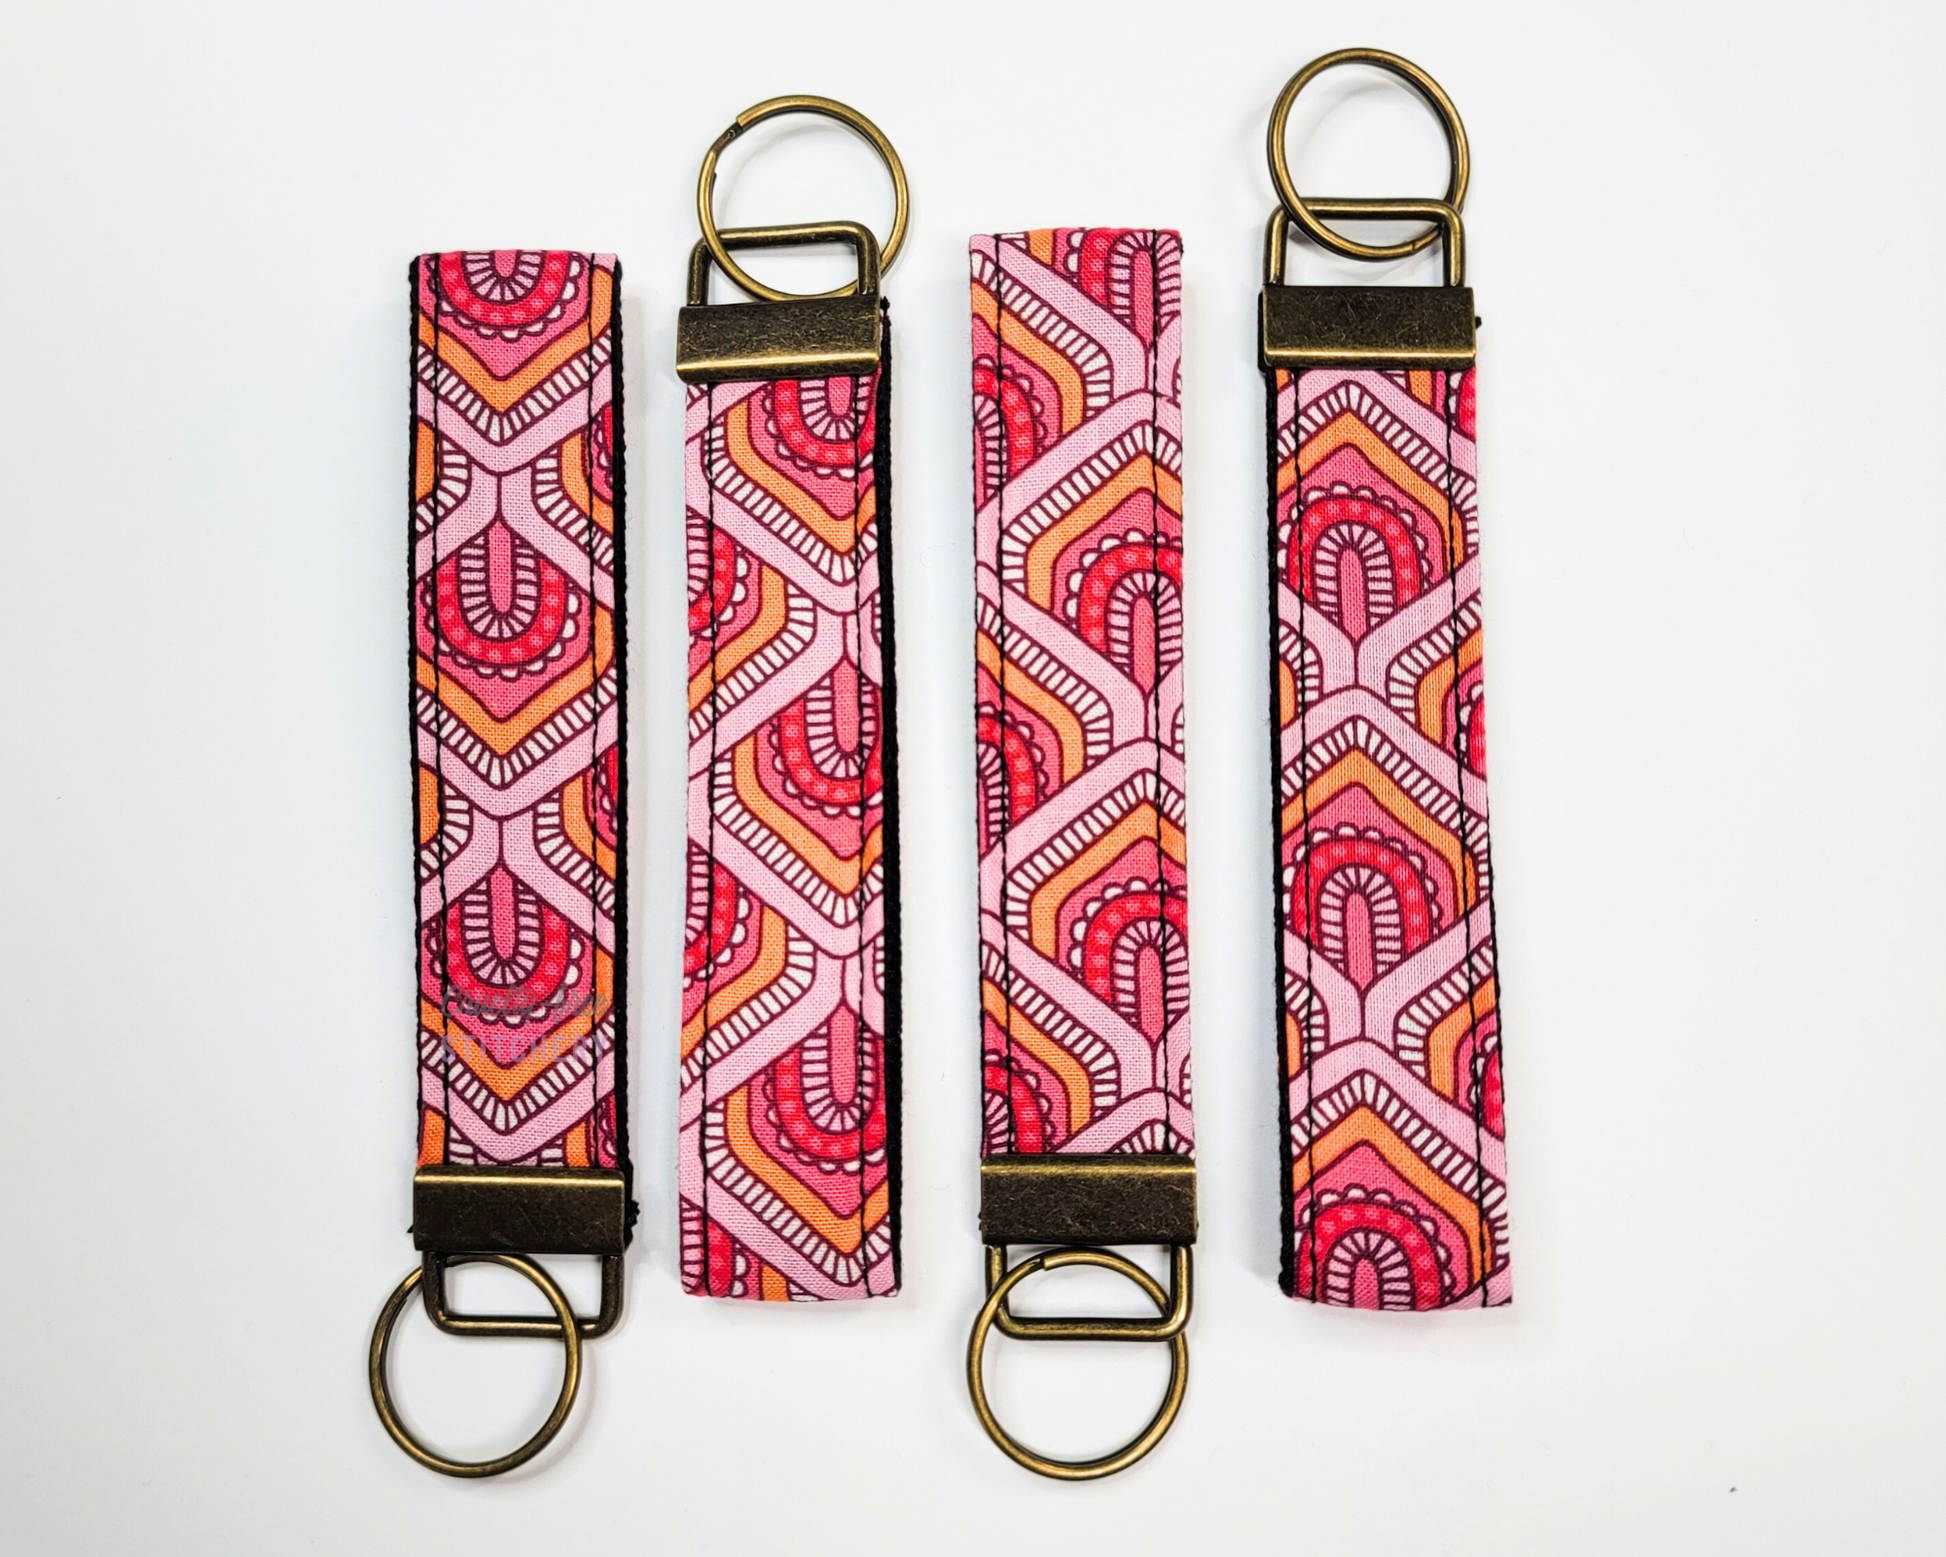 Four key fobs lined up in alternating directions. The wristlet straps are various shades of pink and orange with a large scaled pattern.